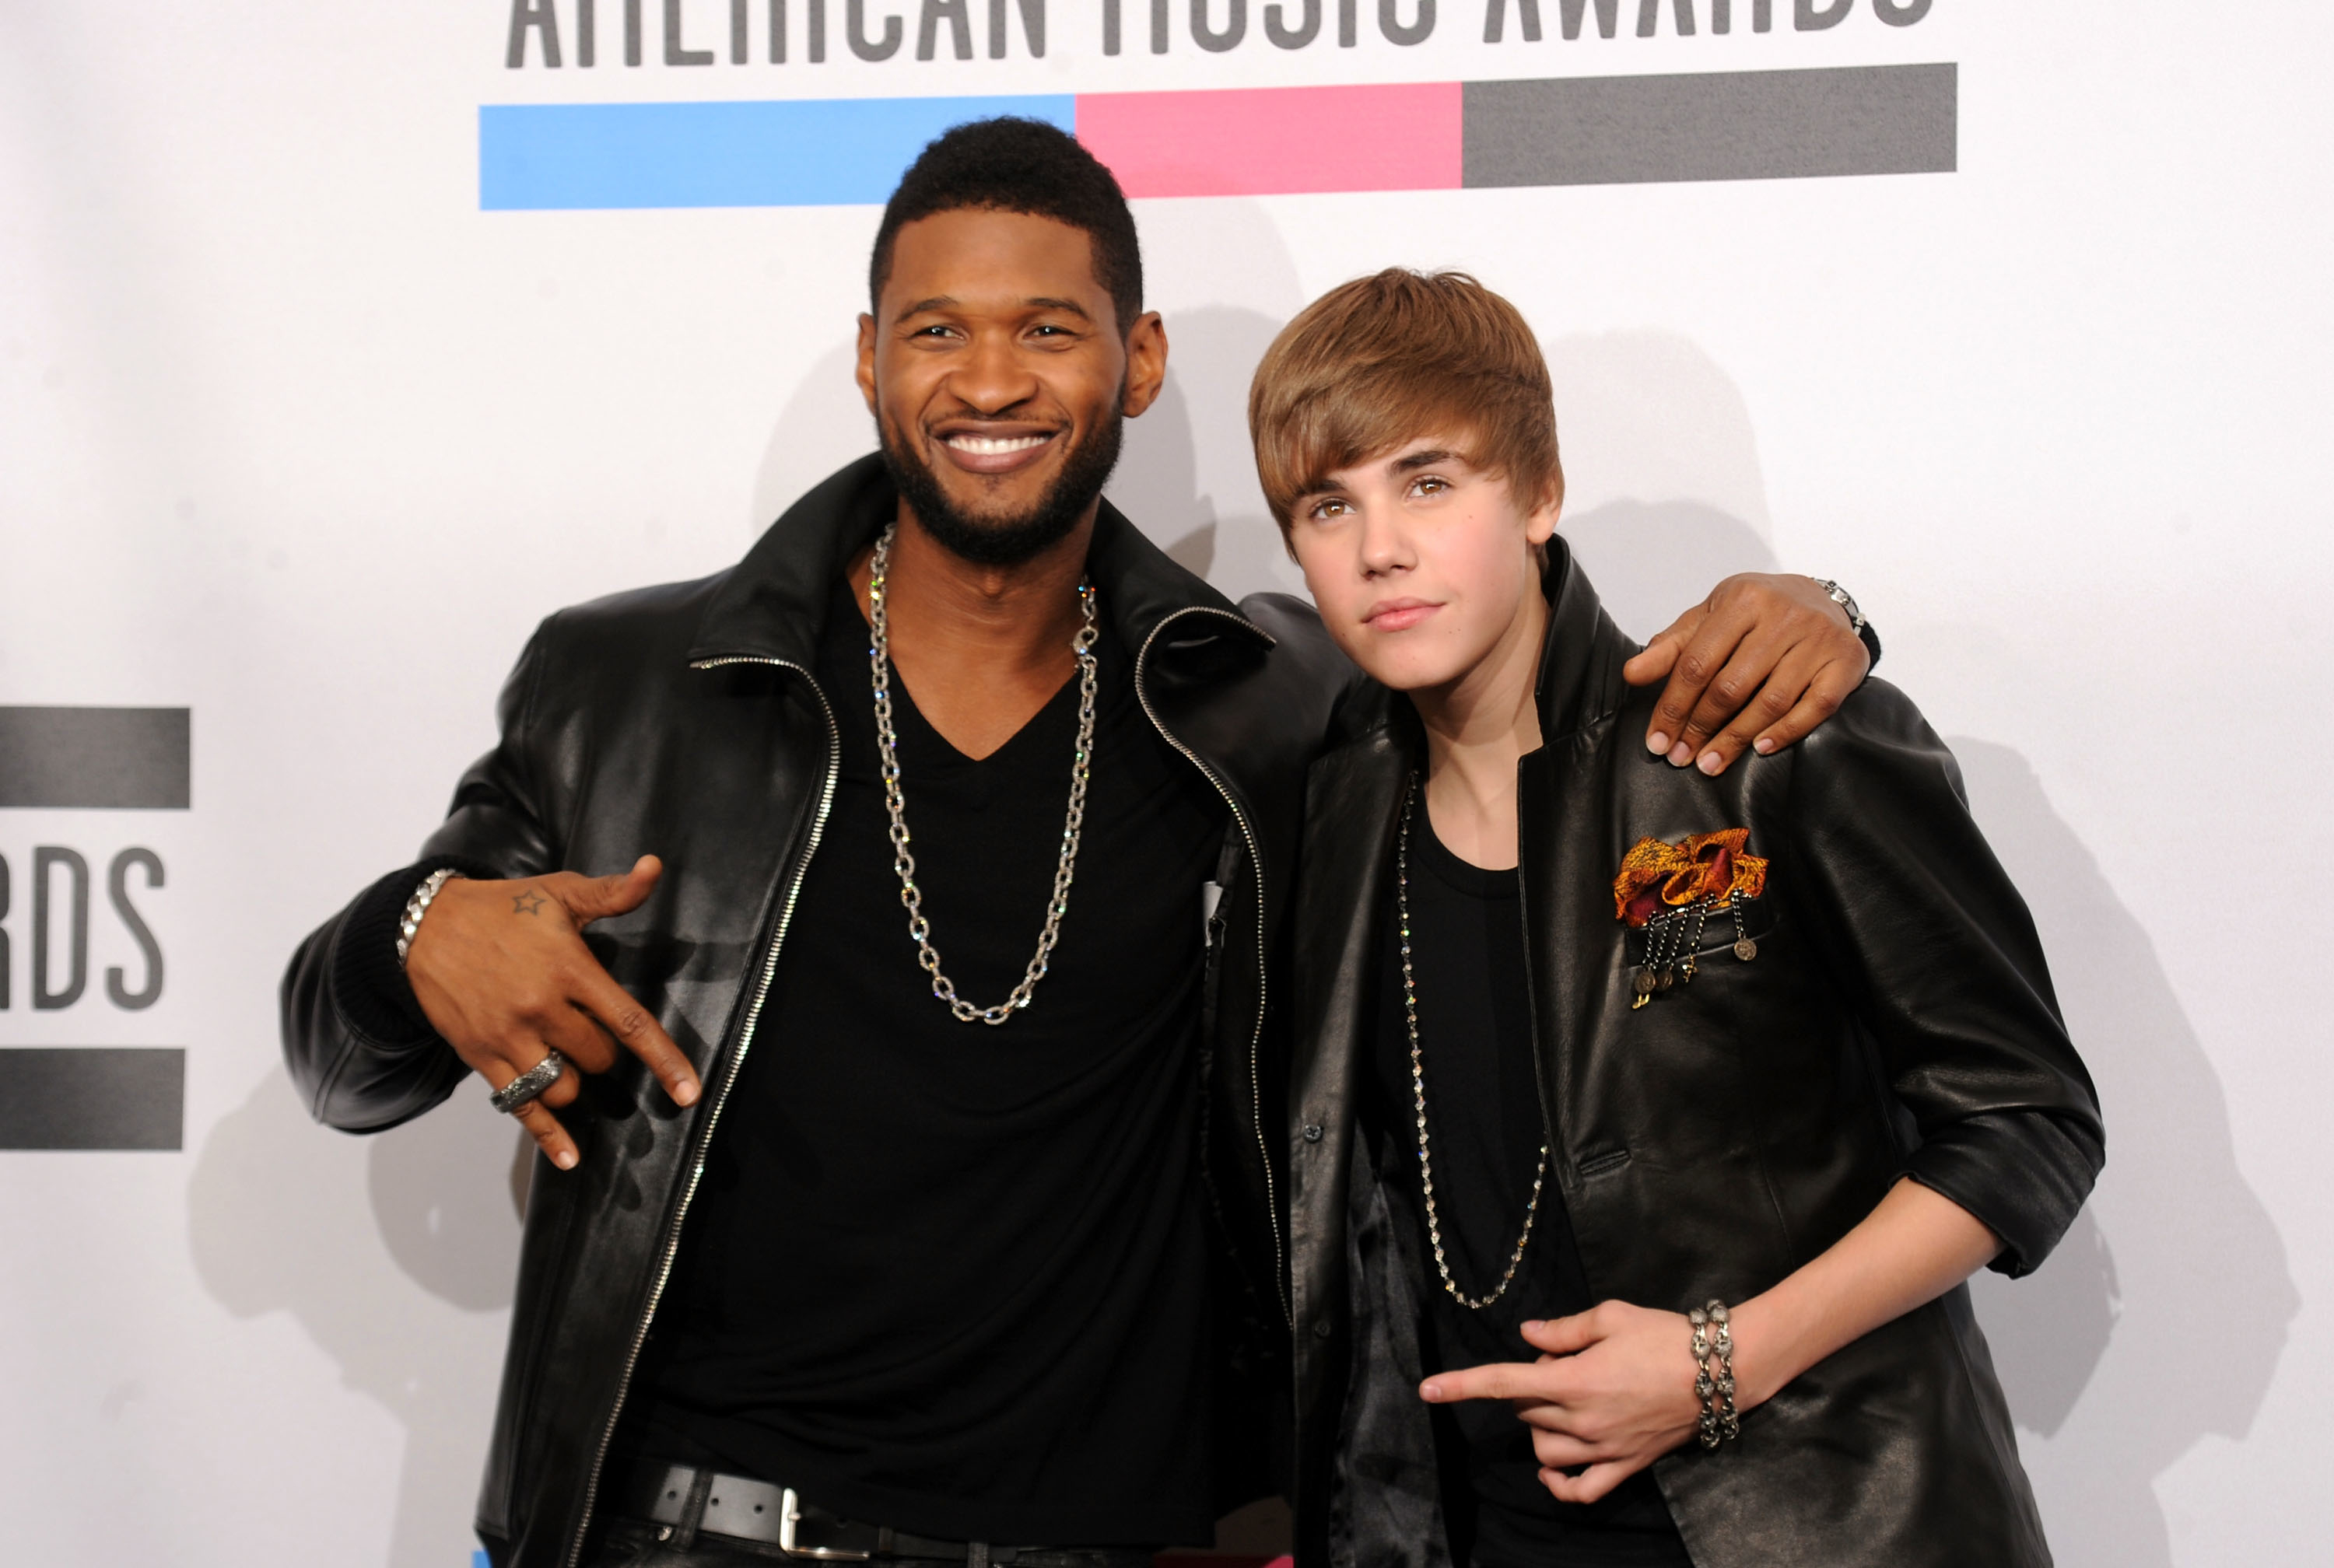 Usher and Justin Bieber posing together at the American Music Awards, both wearing leather jackets